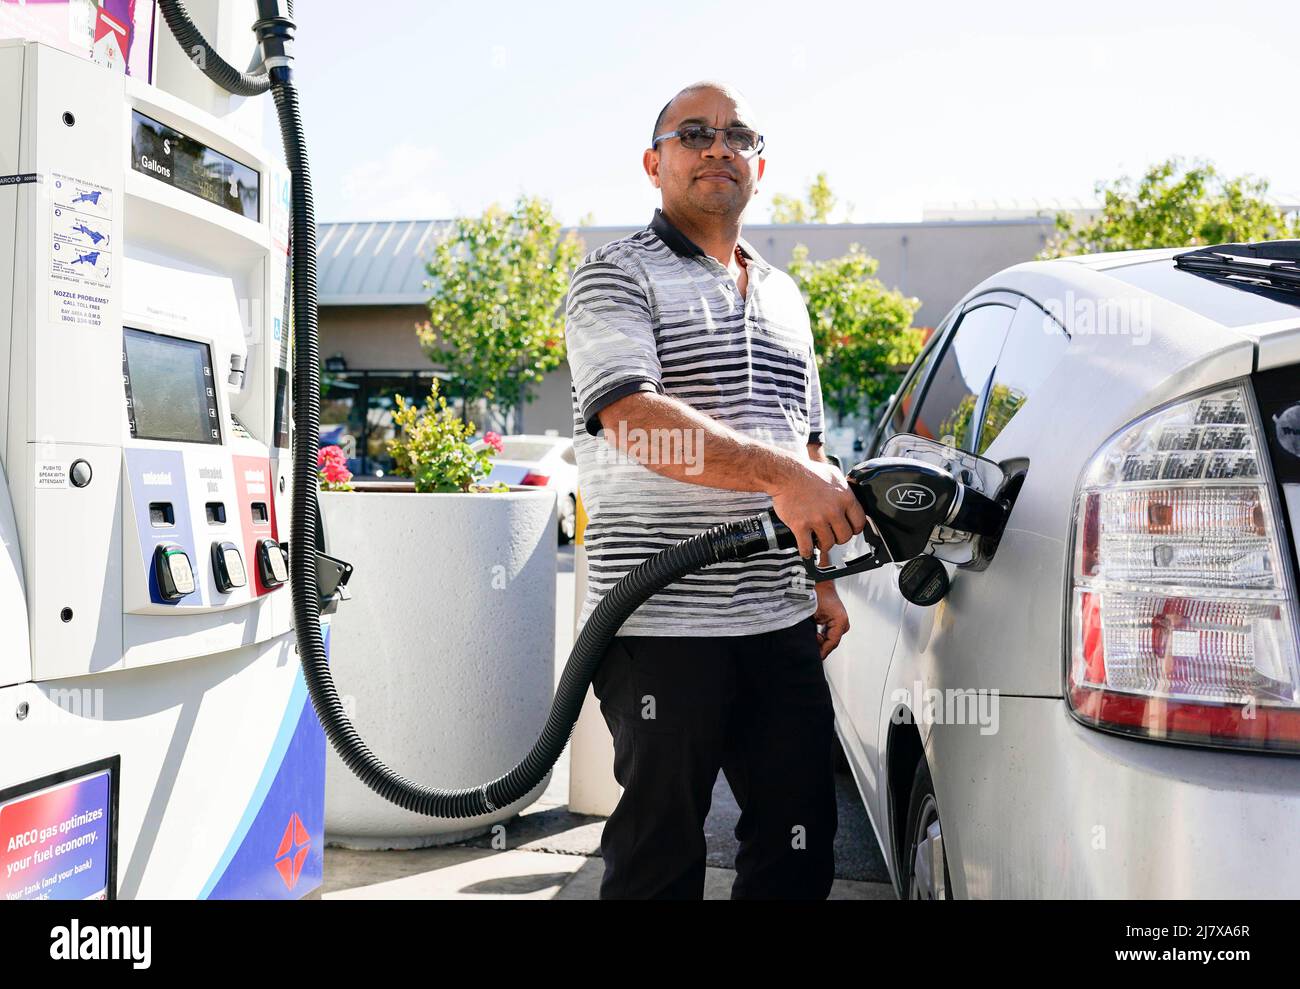 (220511) -- MILLBRAE, May 11, 2022 (Xinhua) -- A man pumps gasoline into his car at a gas station in Millbrae, California, the United States, May 10, 2022. The national average prices for regular gasoline and diesel in the United States both climbed to fresh record highs Tuesday. According to the American Automobile Association (AAA), which provides the latest gas price analysis based on data from 130,000 gas stations nationwide, the regular gas price rose four cents on Tuesday to 4.37 U.S. dollars a gallon, overtaking the prior record of 4.33 dollars on March 11. (Photo by Li Jianguo/Xinhua Stock Photo